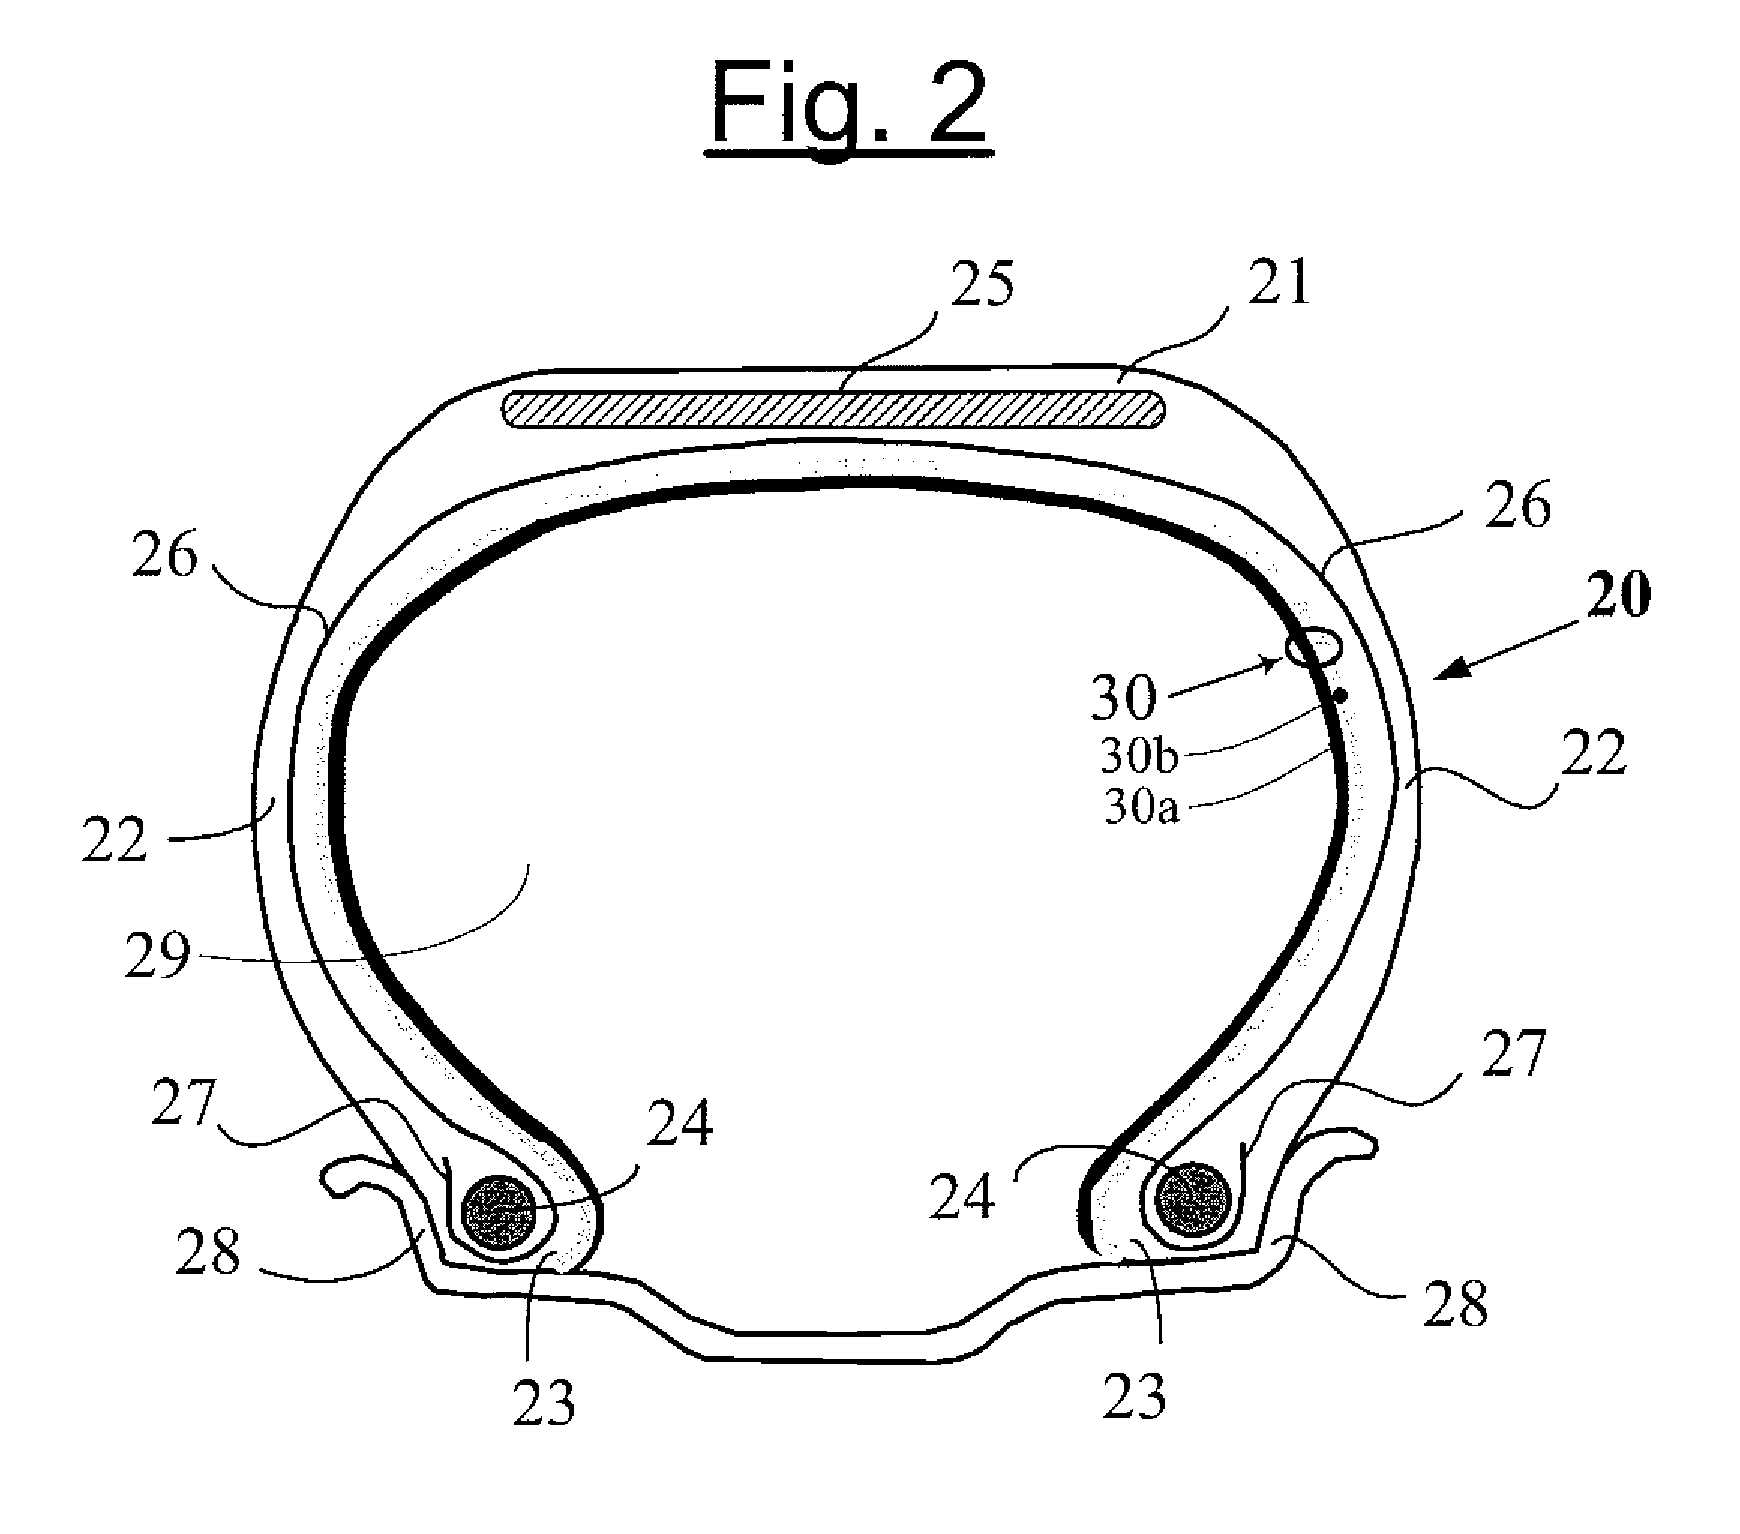 Process for manufacturing a self-sealing composition